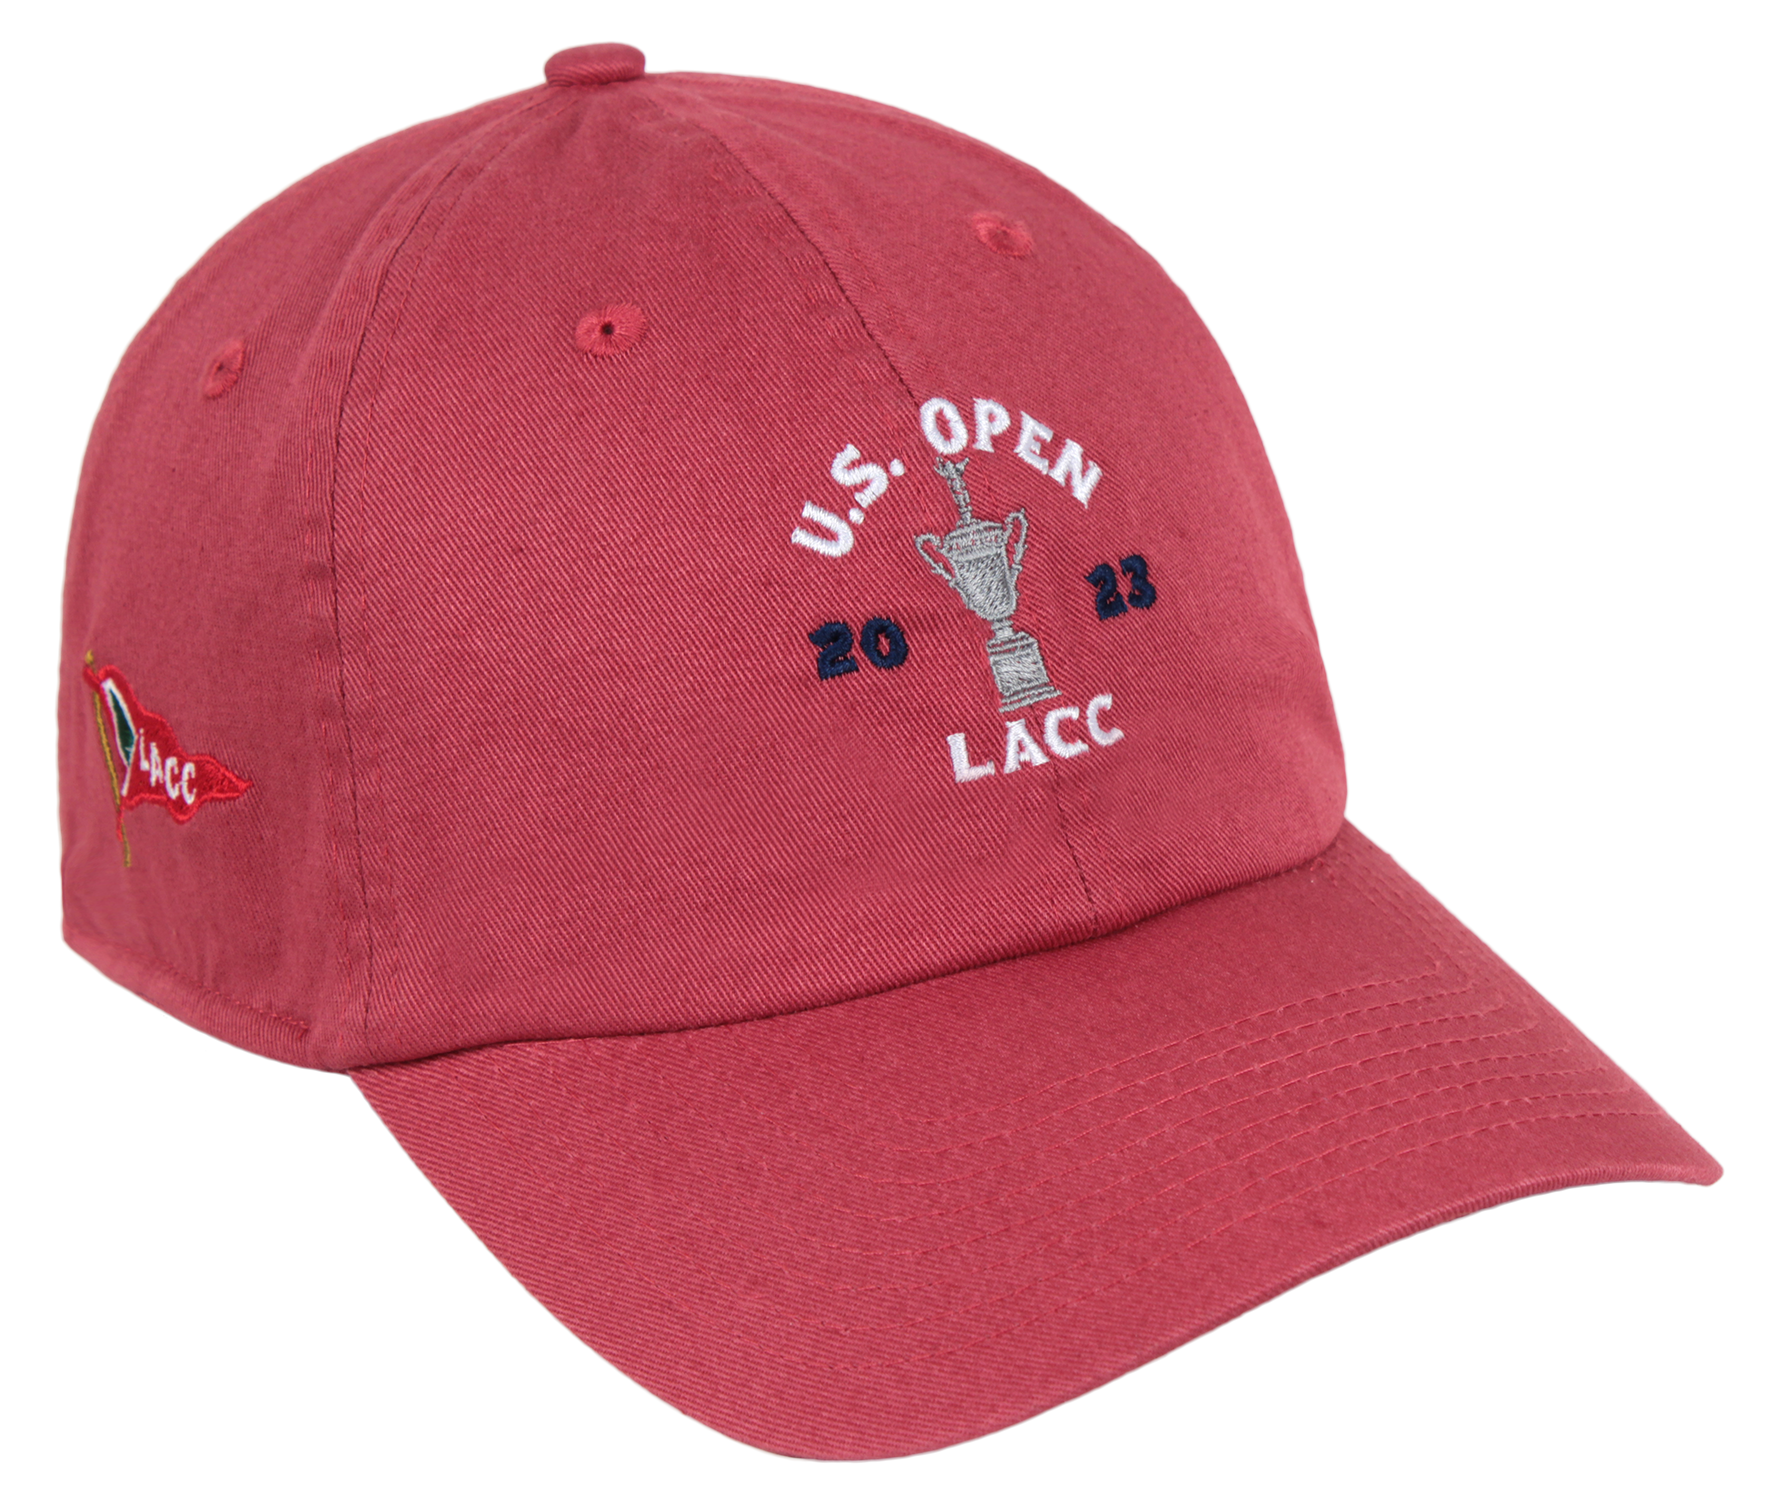 Fit Twill – Cap USA Open Red Washed Shop Relaxed Ahead Cotton U.S.